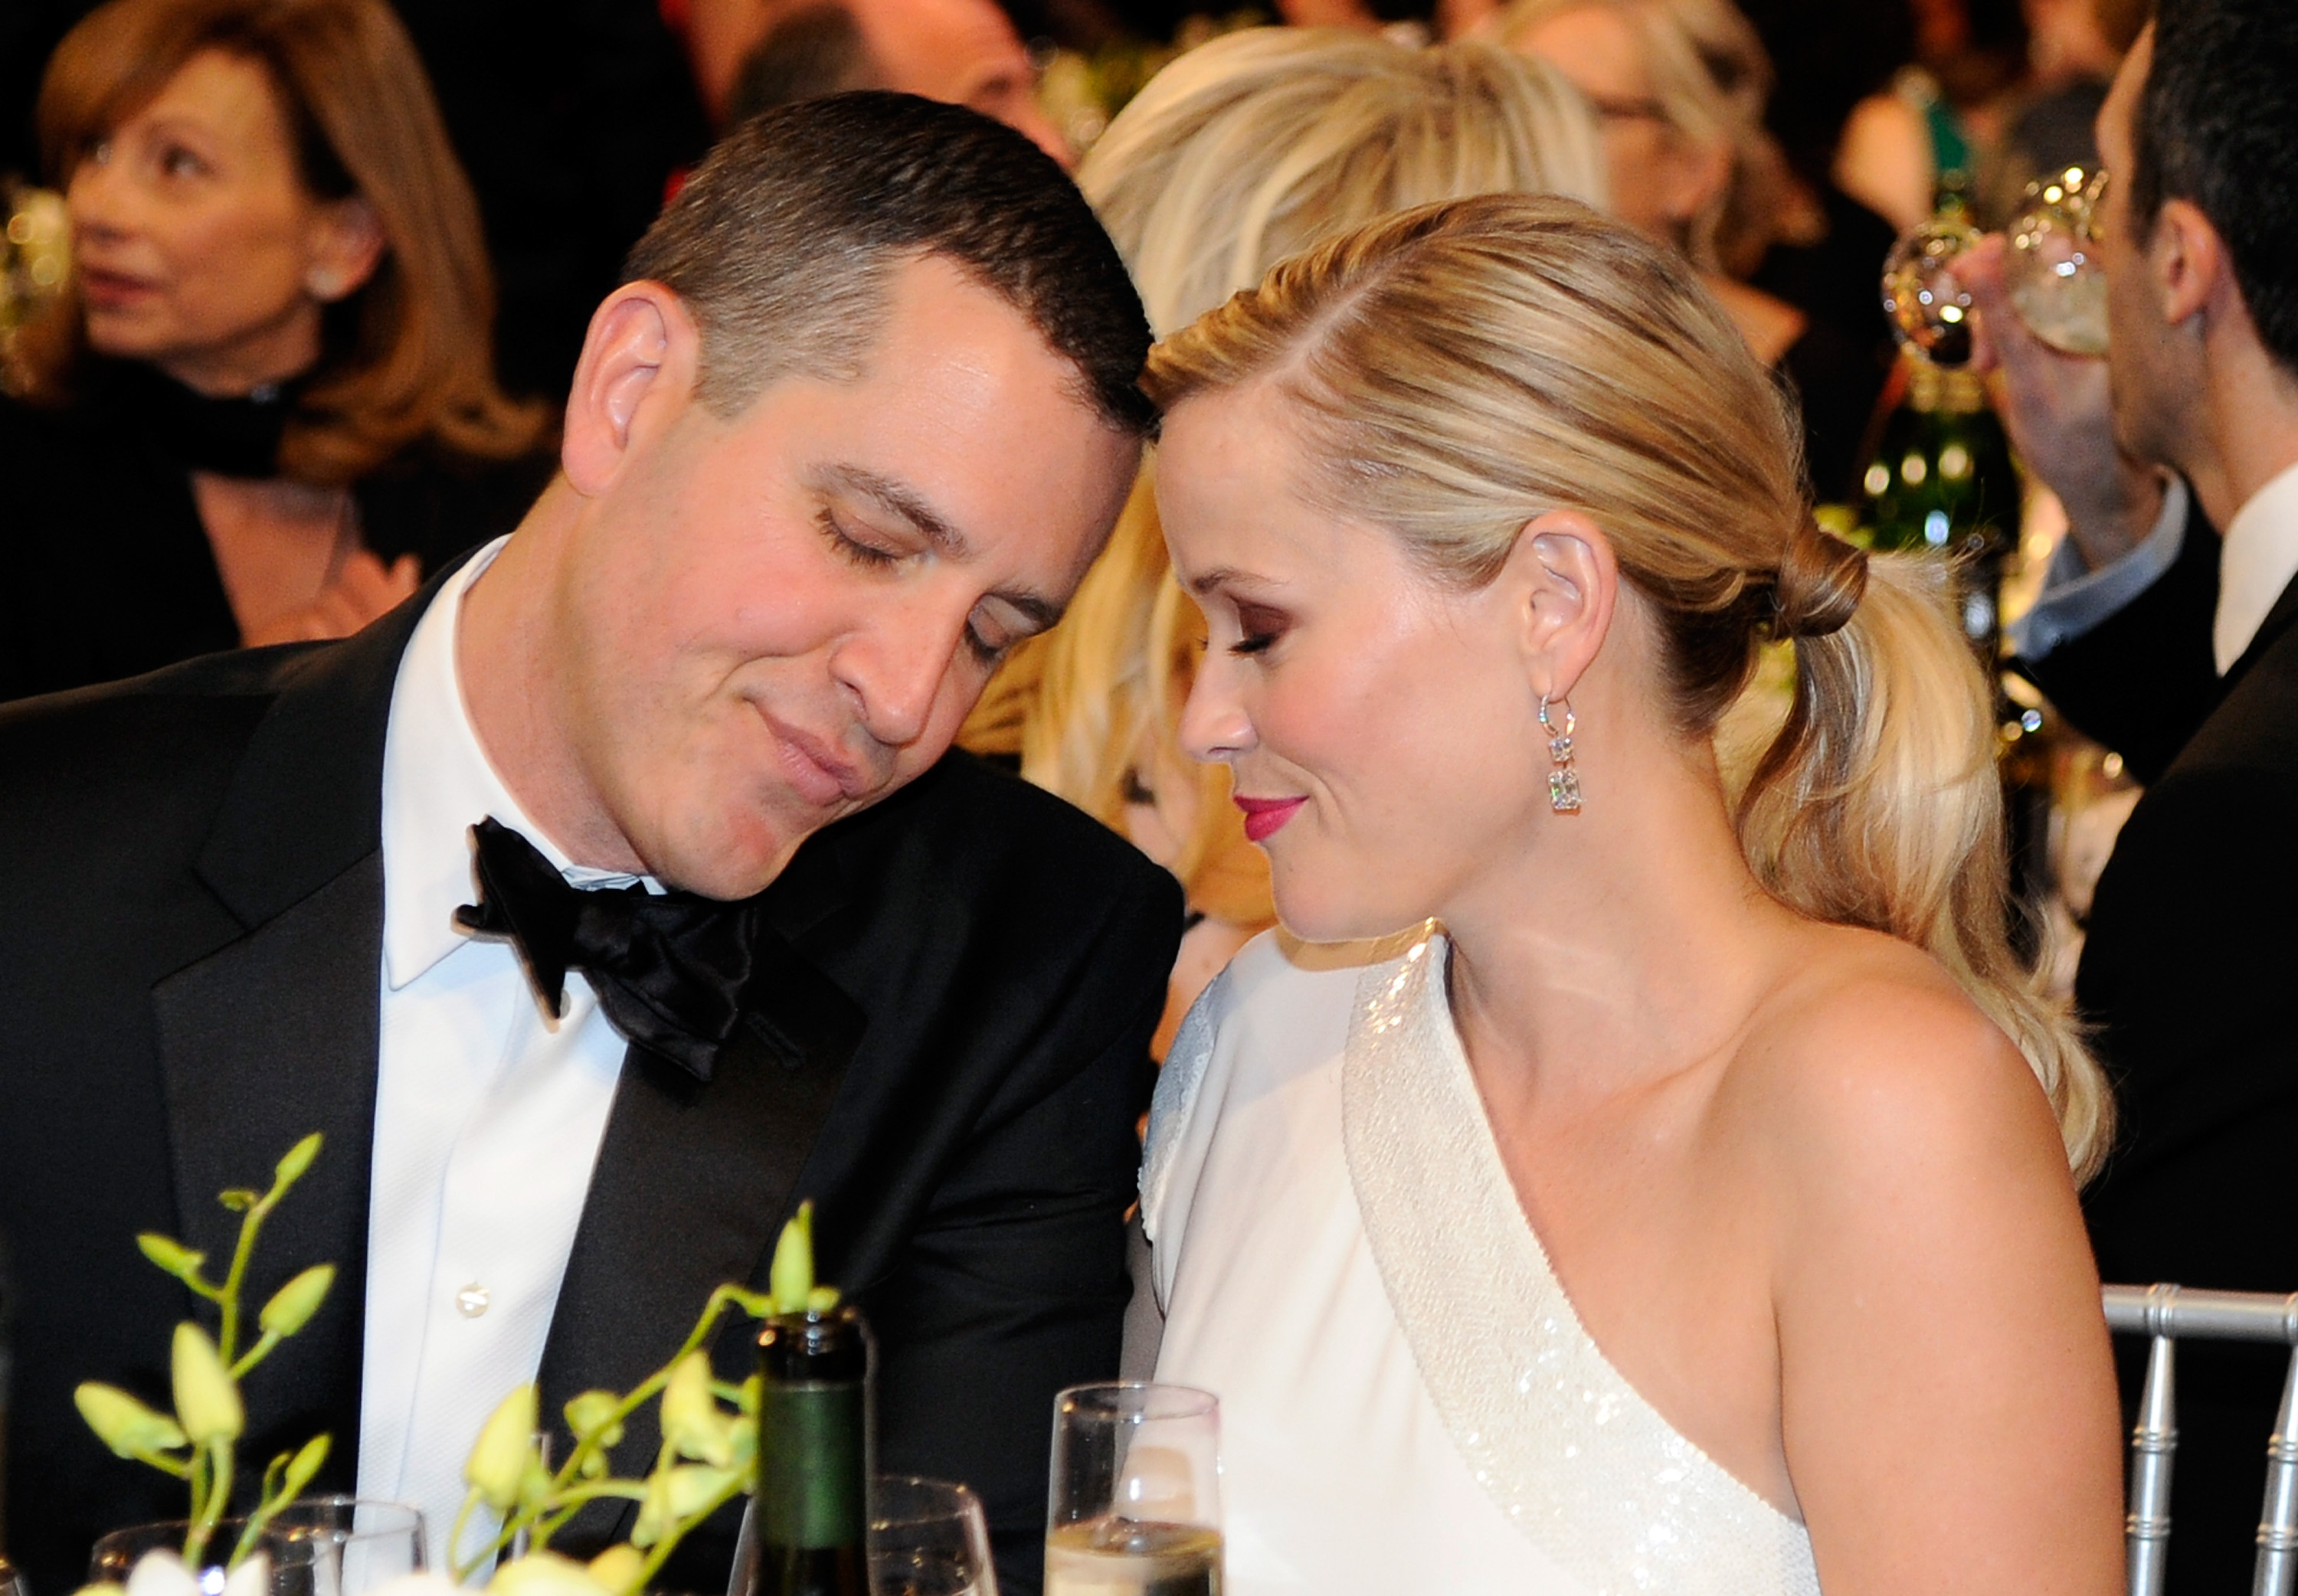 Jim Toth (L) and actress Reese Witherspoon attend the 21st Annual Screen Actors Guild Awards at The Shrine Auditorium on January 25, 2015 in Los Angeles, California. | Source: Getty Images